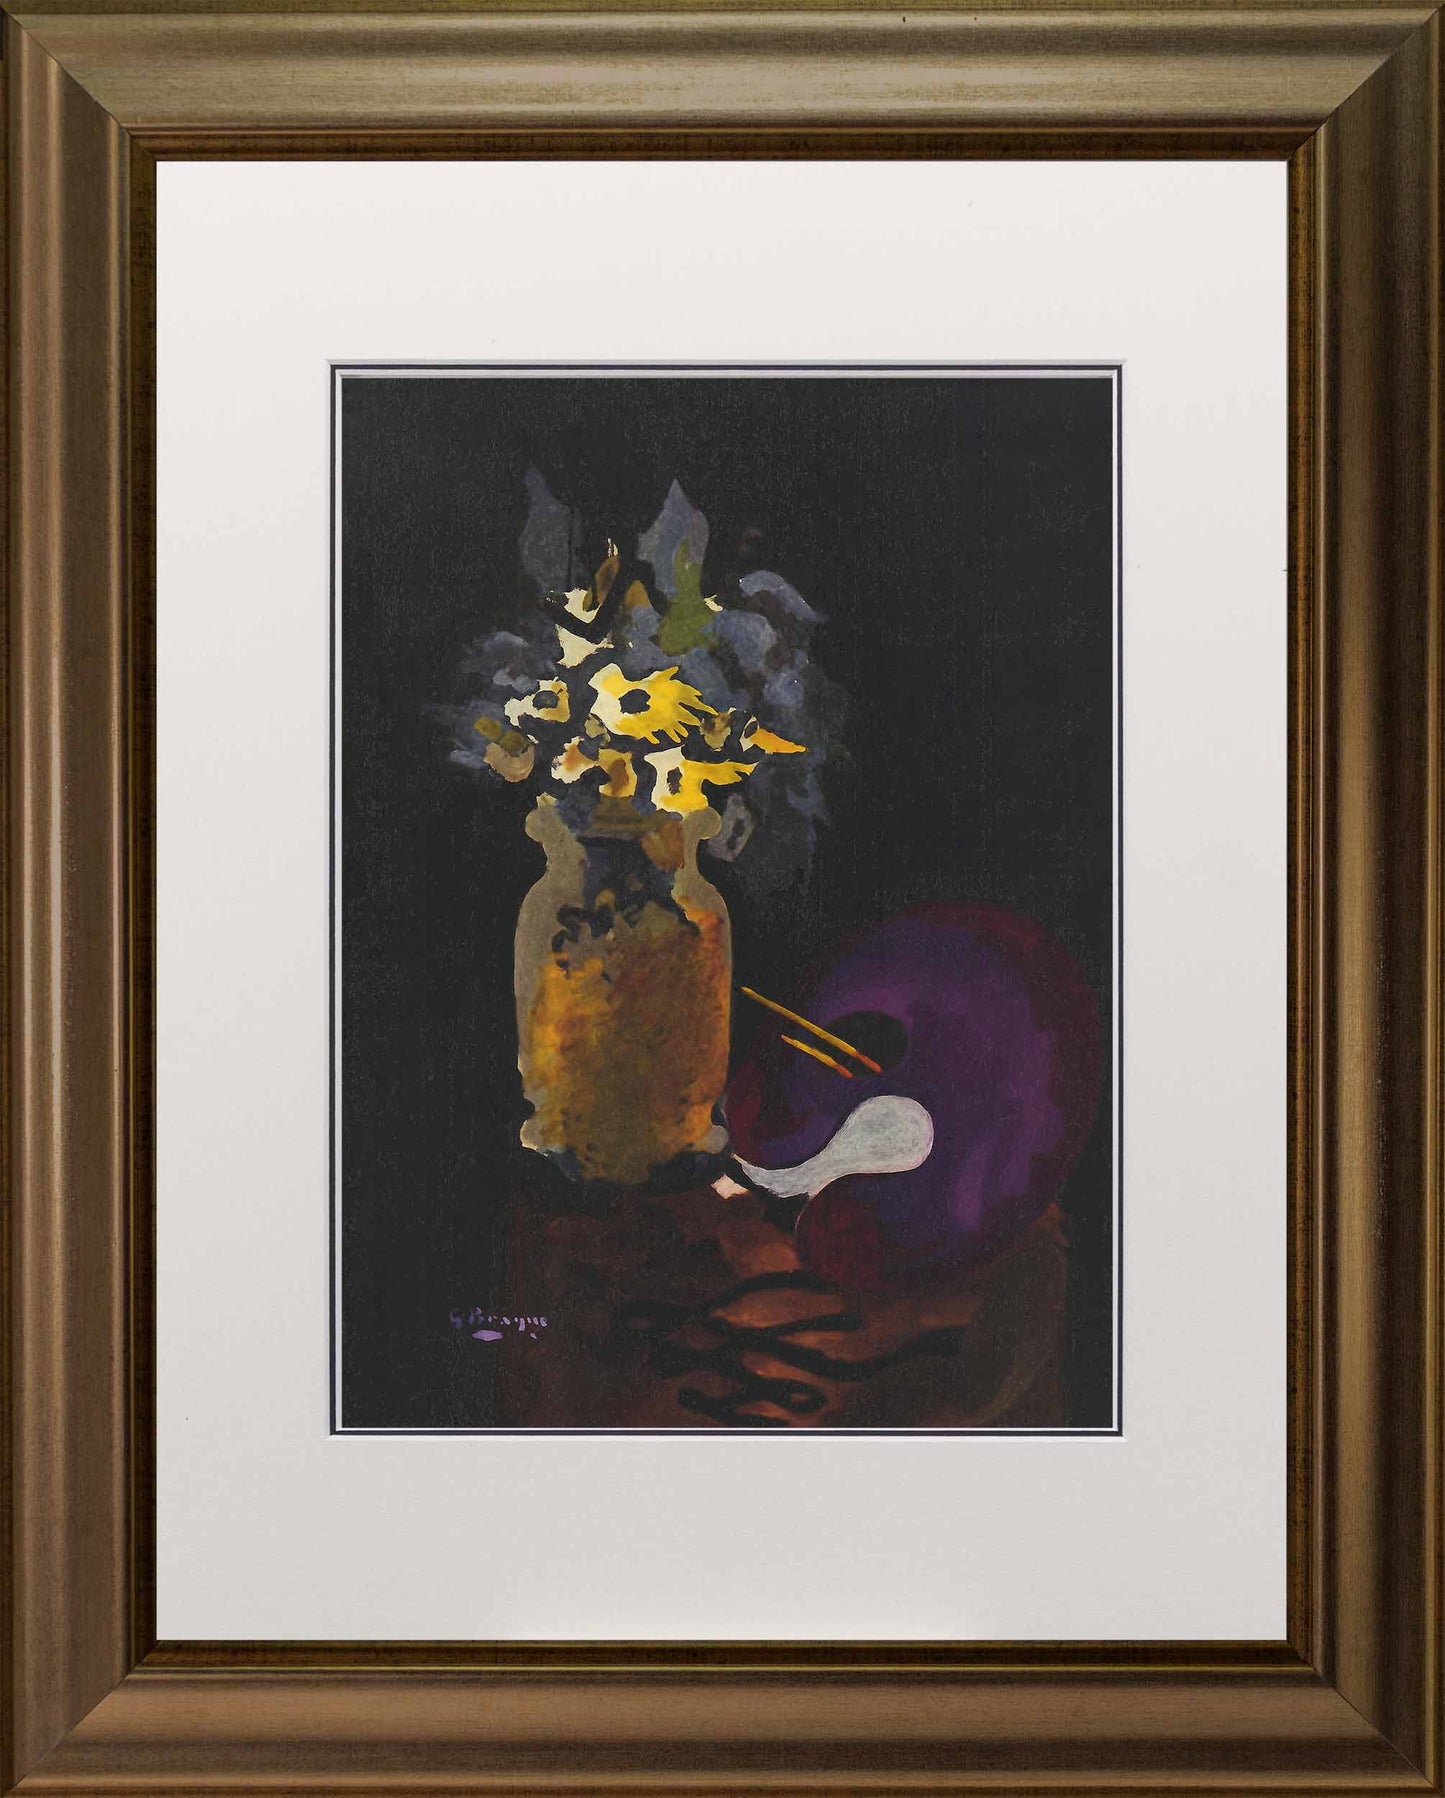 Georges Braque, "Untitled XIX"